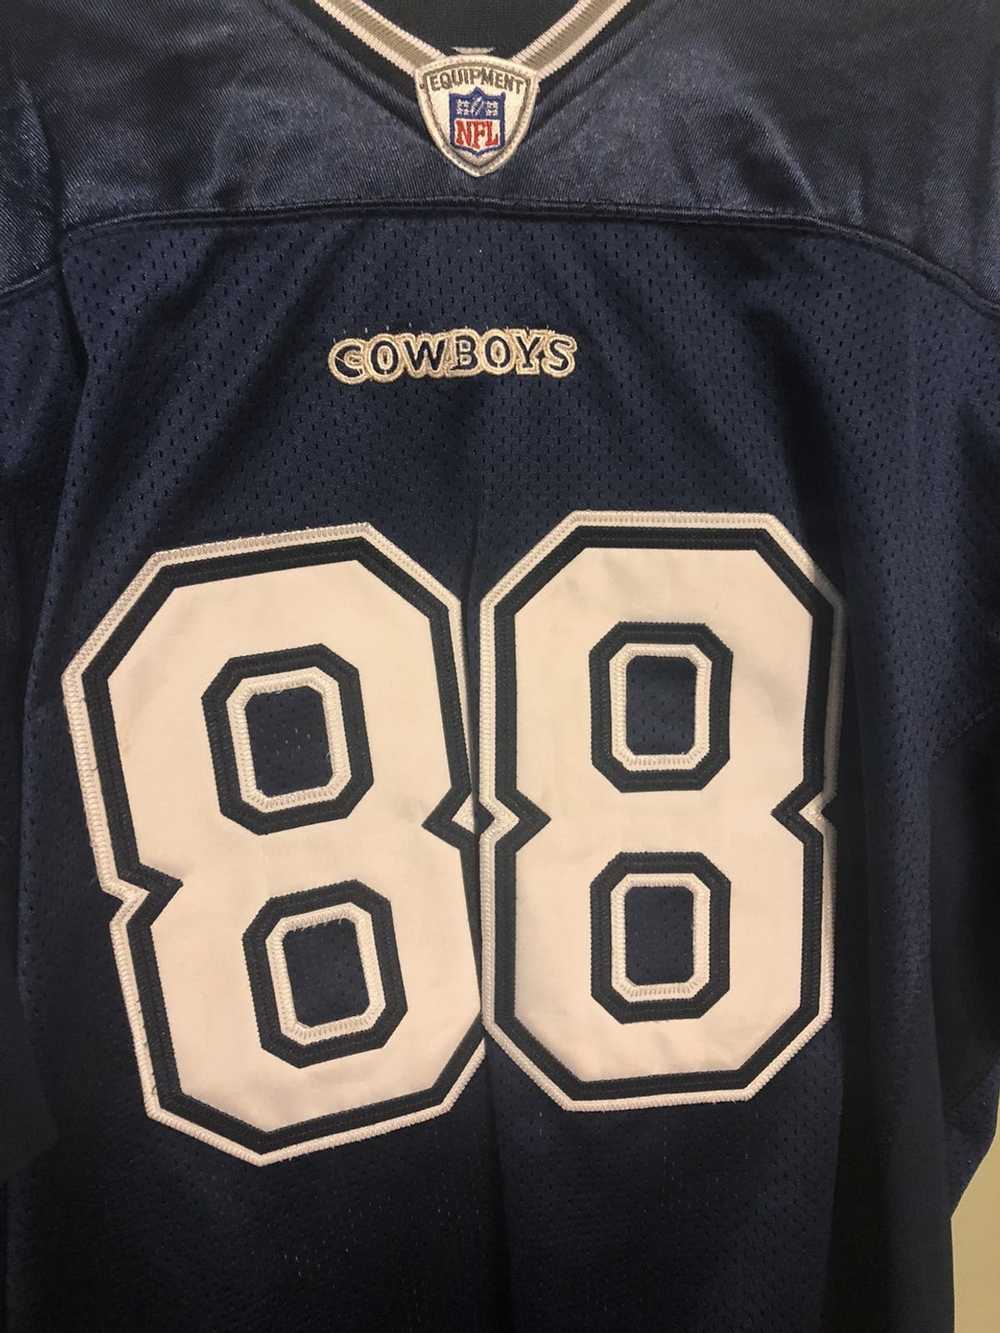 Chic Cowboys Womens Blue T-Shirt - #88 Dez Bryant Silver Numbers